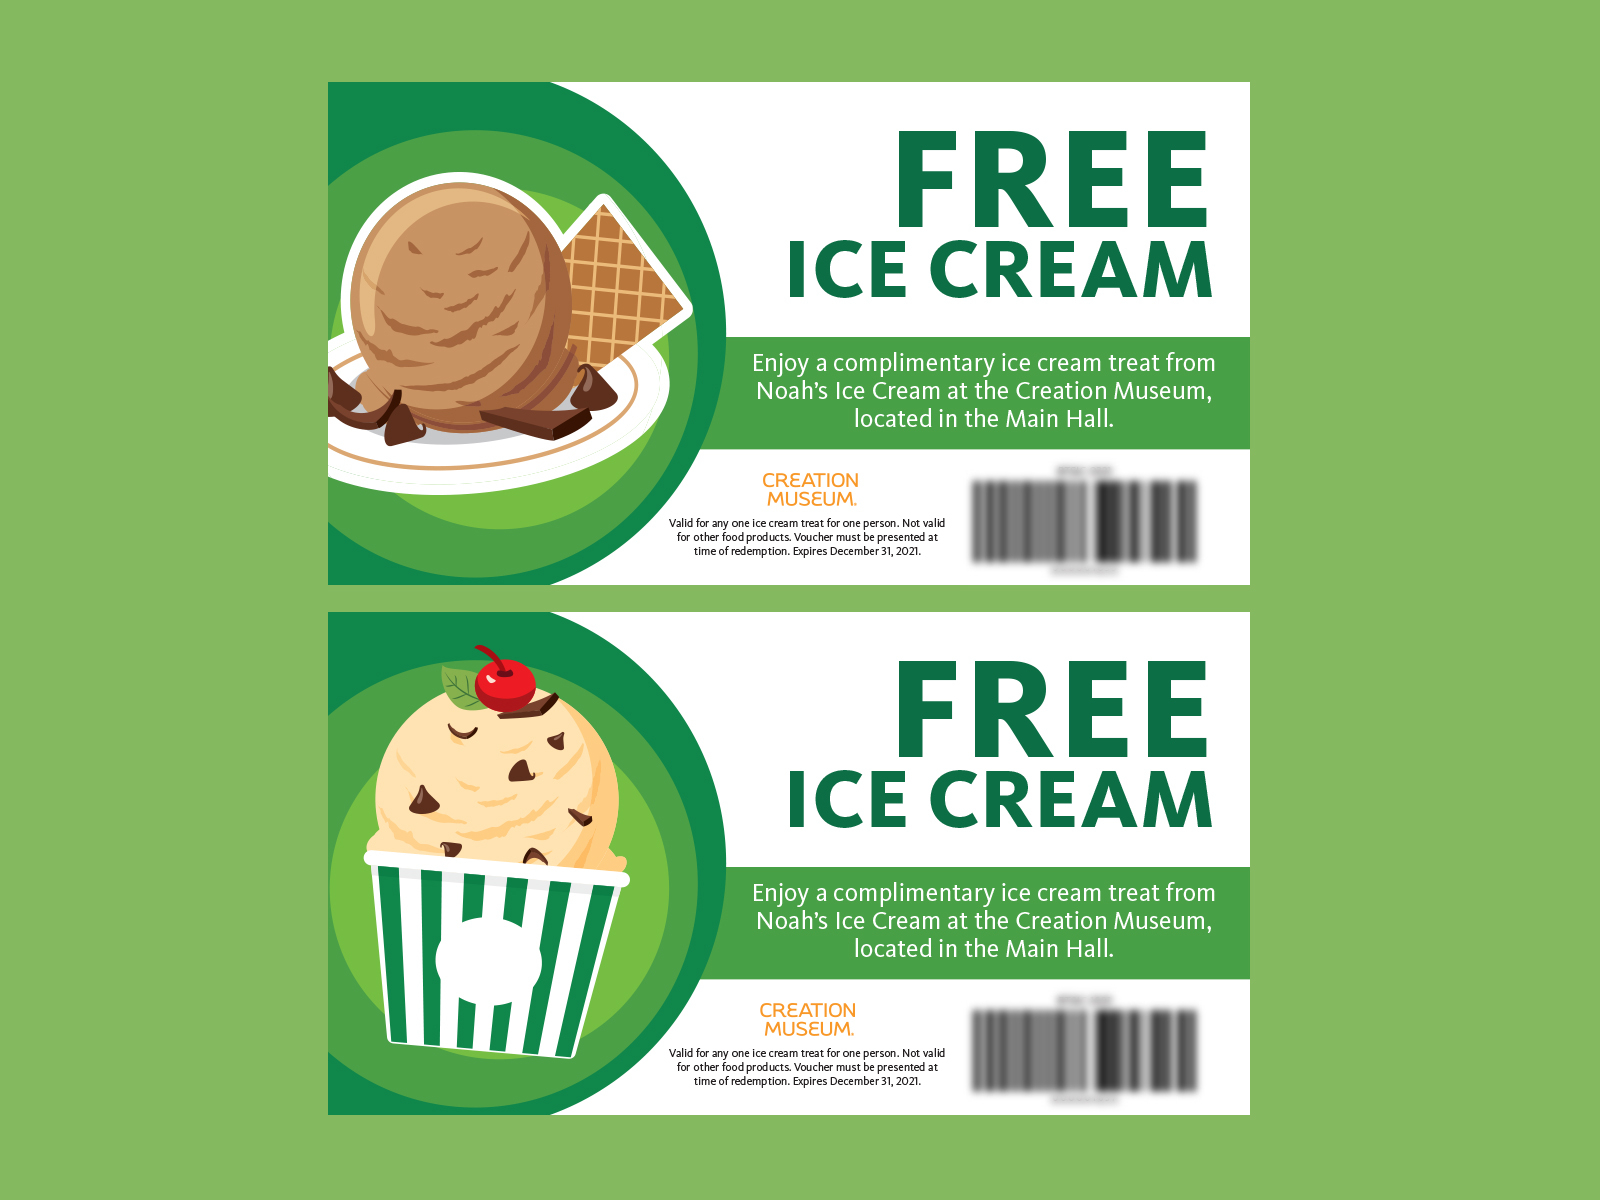 Free Ice Cream Coupons for Answers in Genesis by Jonathan Williquette